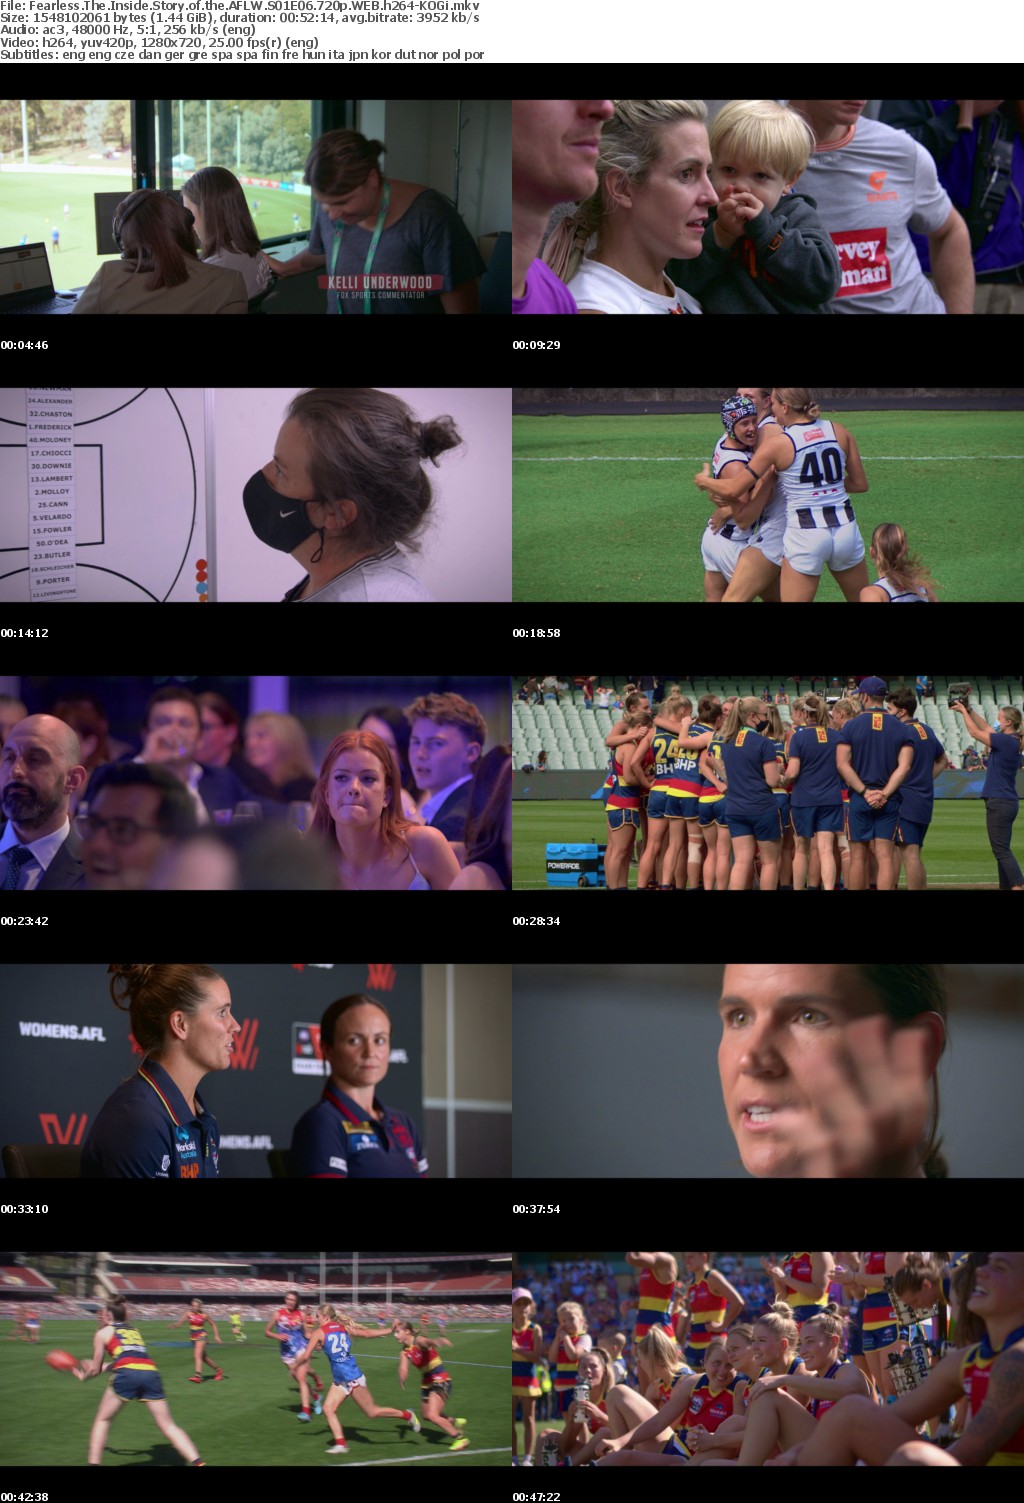 Fearless The Inside Story of the AFLW S01E06 720p WEB h264-KOGi